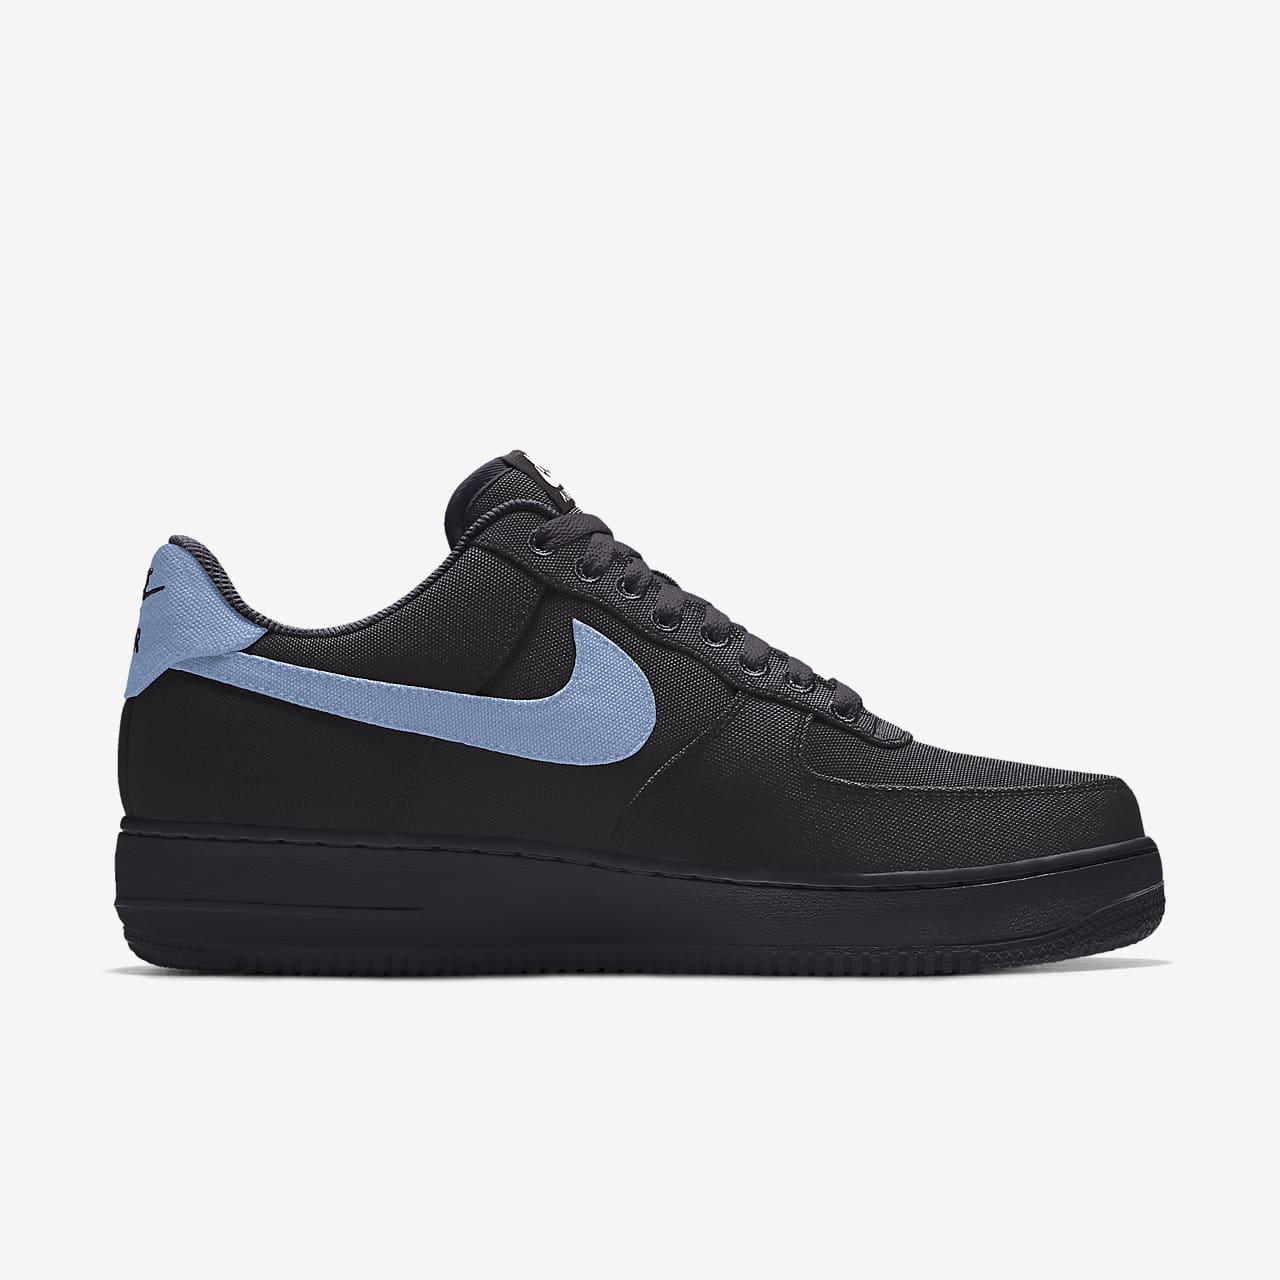 Nike Air Force 1 Low By You personalizables - Hombre. Nike ES